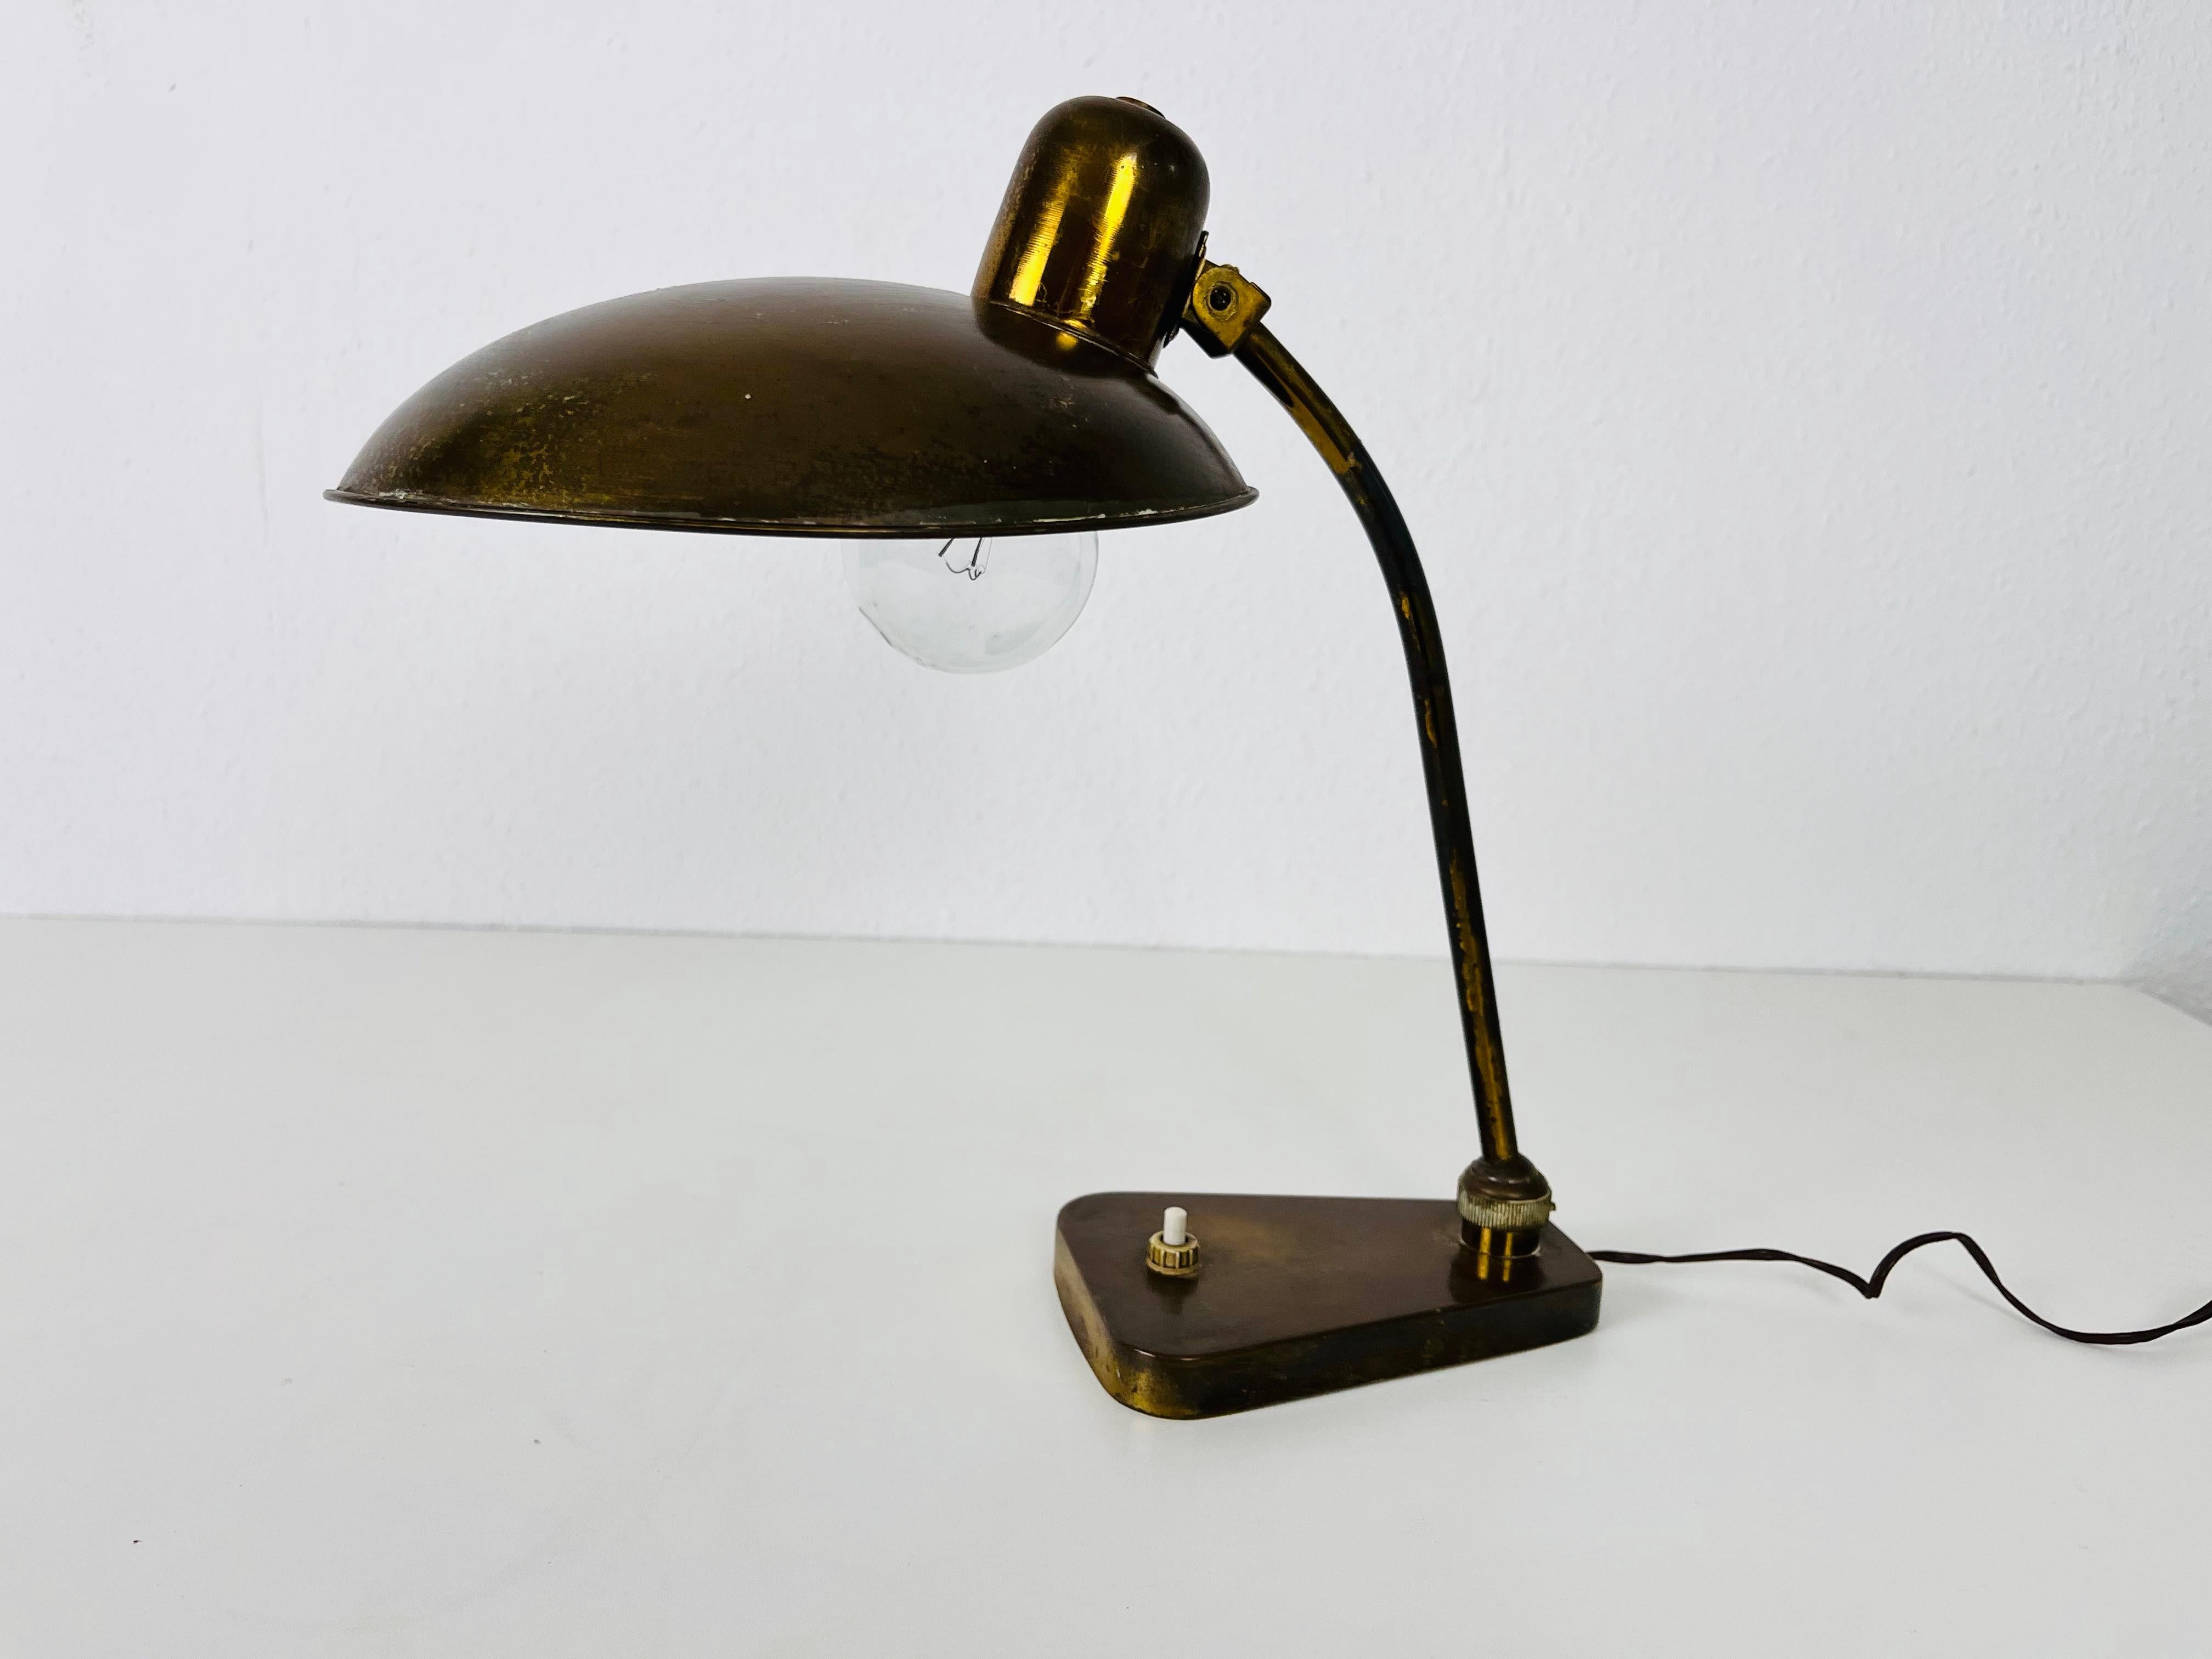 An Italian table lamp made in the 1960s. The lighting is made of brass.

The light requires one E27 (US E26) light bulb. Works with both 120/220V. Good vintage condition.

Free worldwide express shipping.